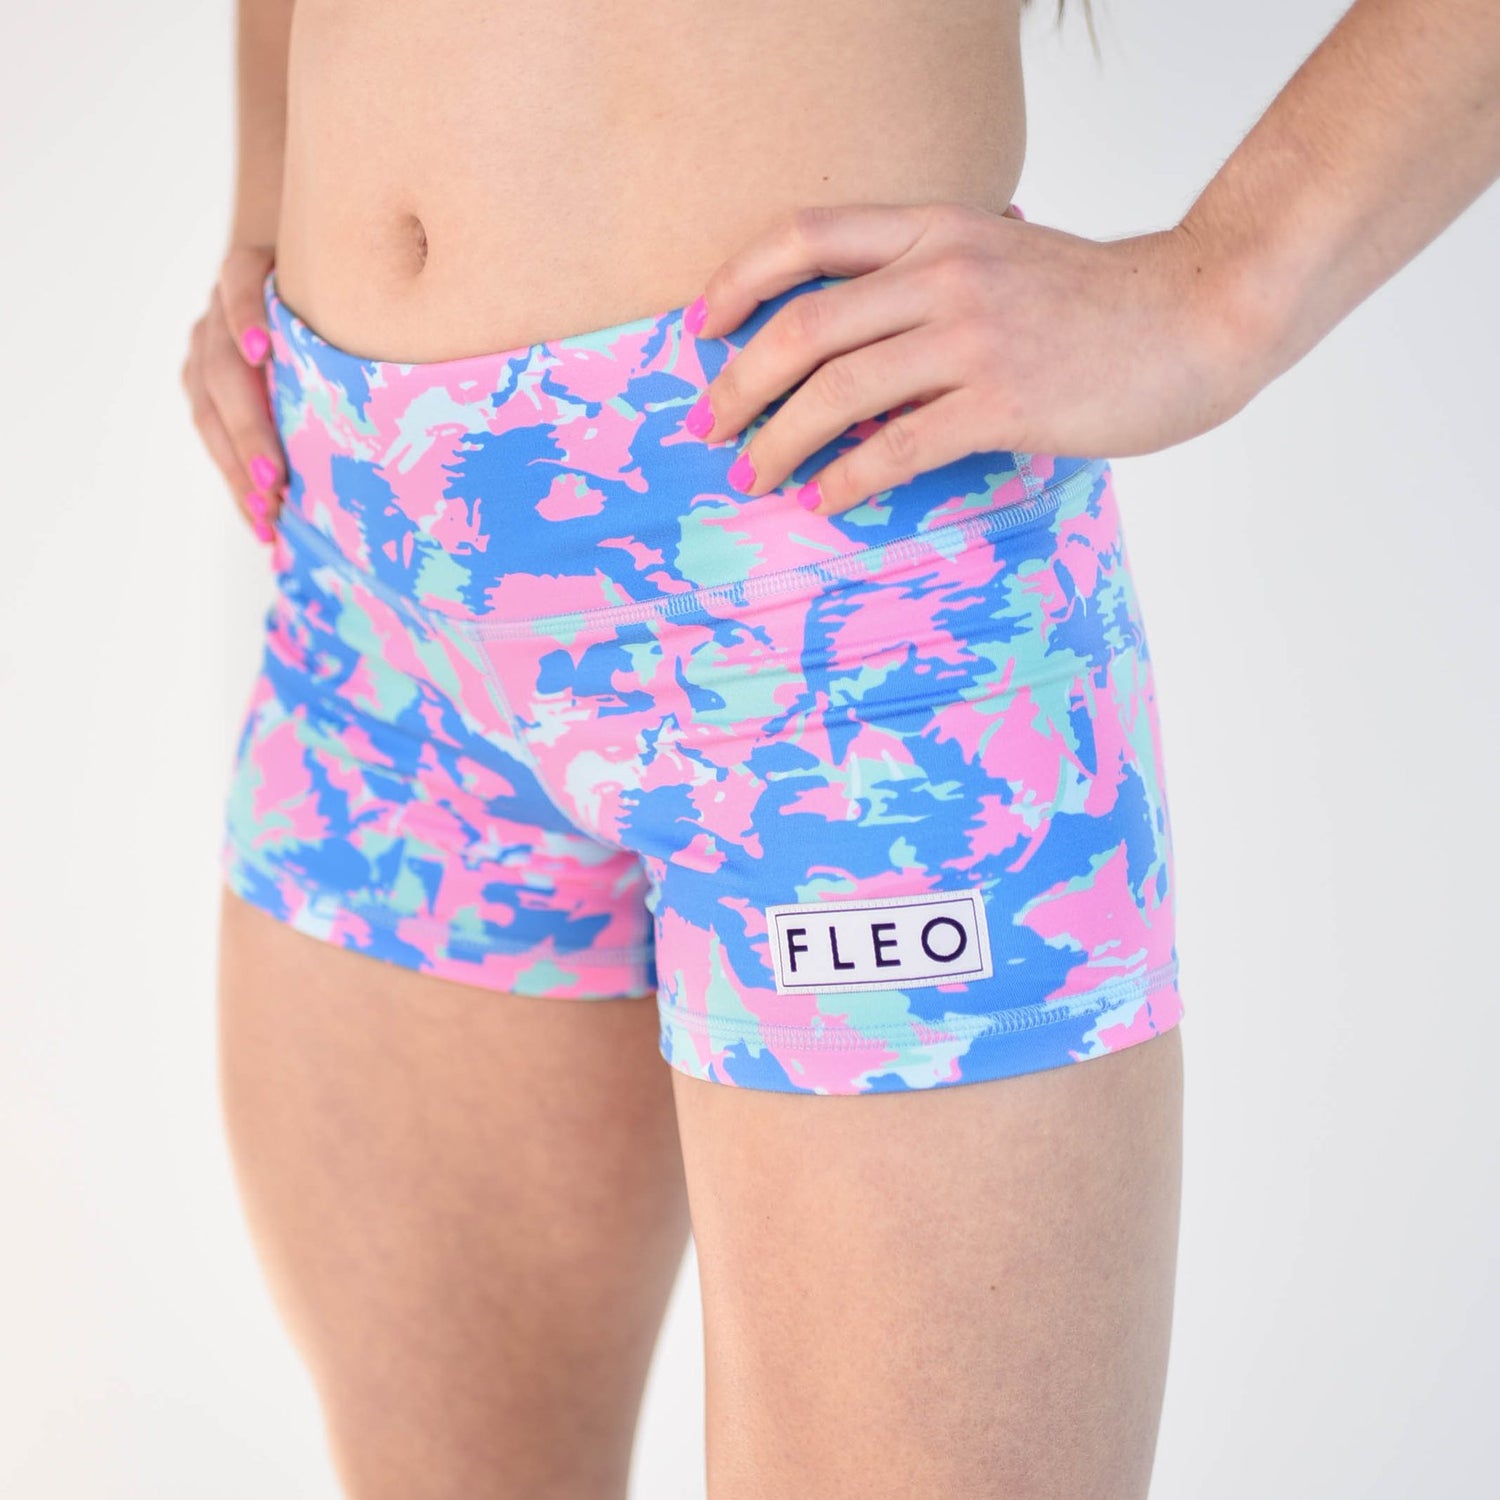 FLEO – Inner Strength Products